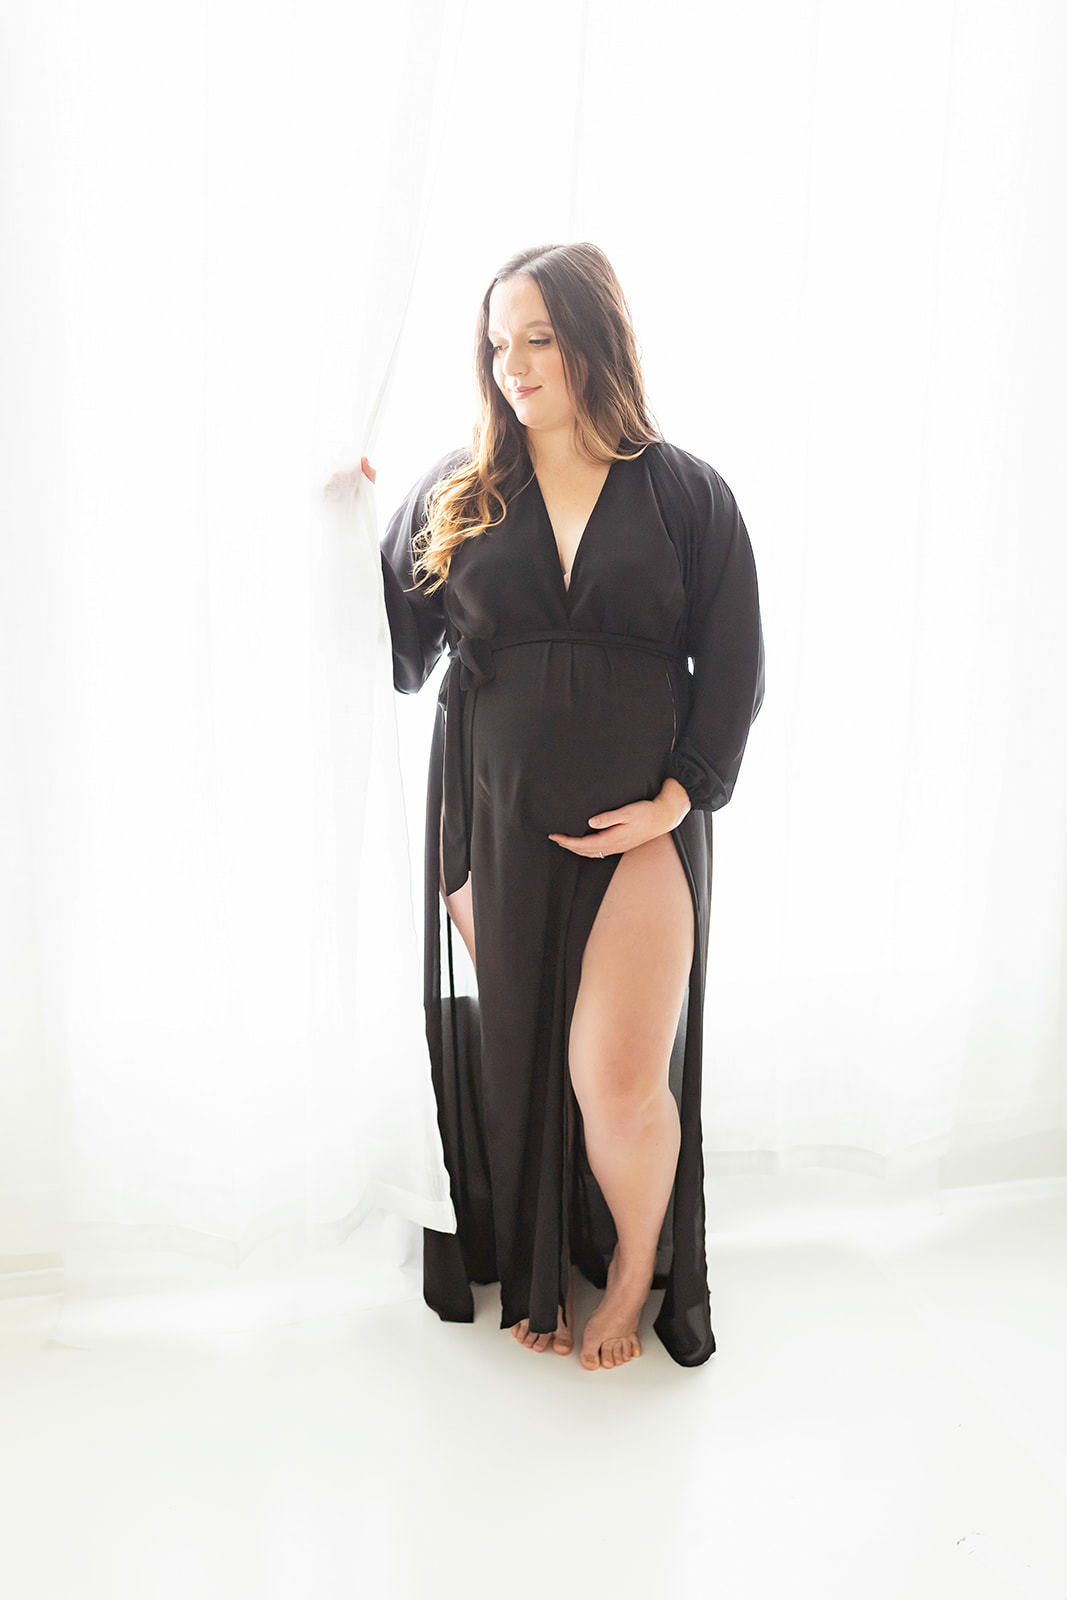 A mom to be stands in a window in a studio wearing a black maternity dress